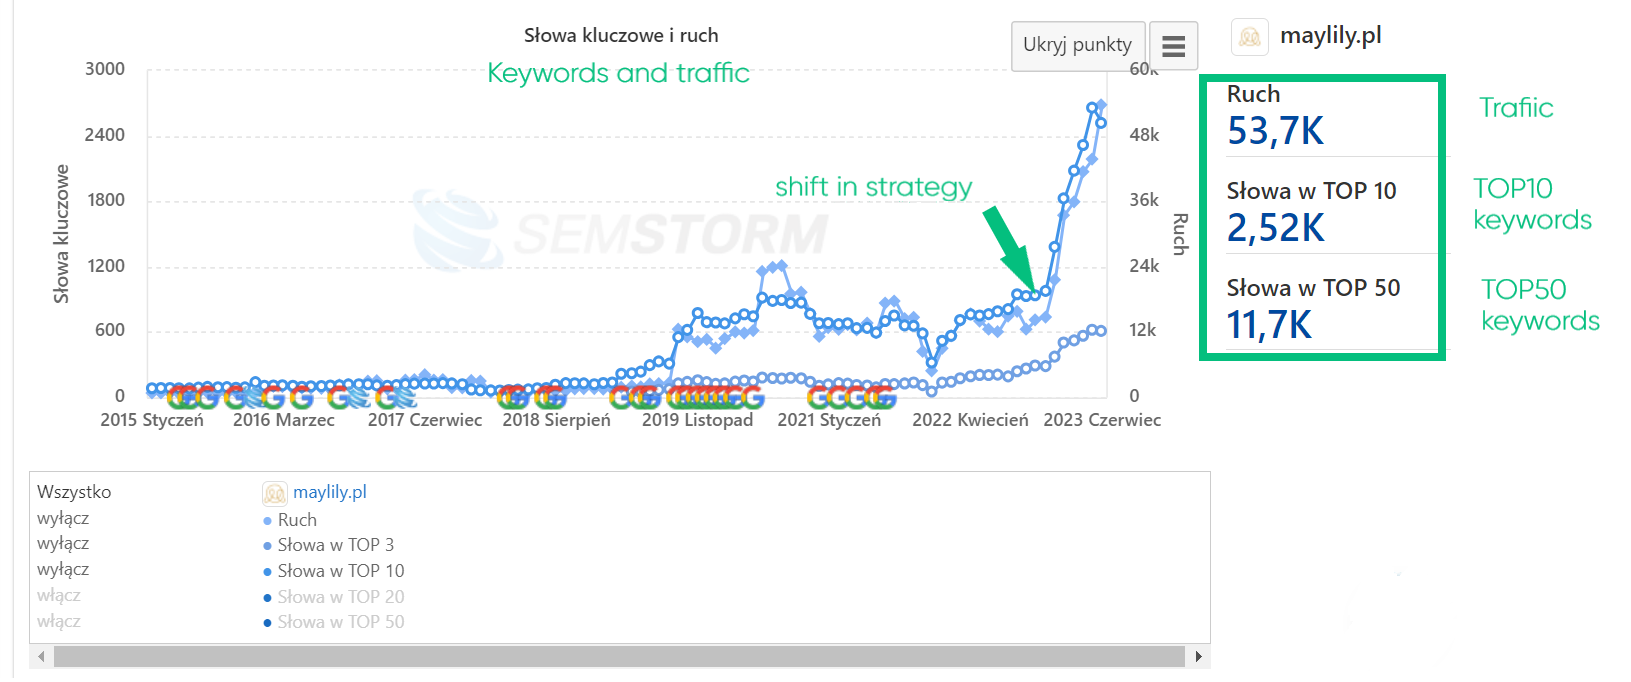 traffic and keywords results